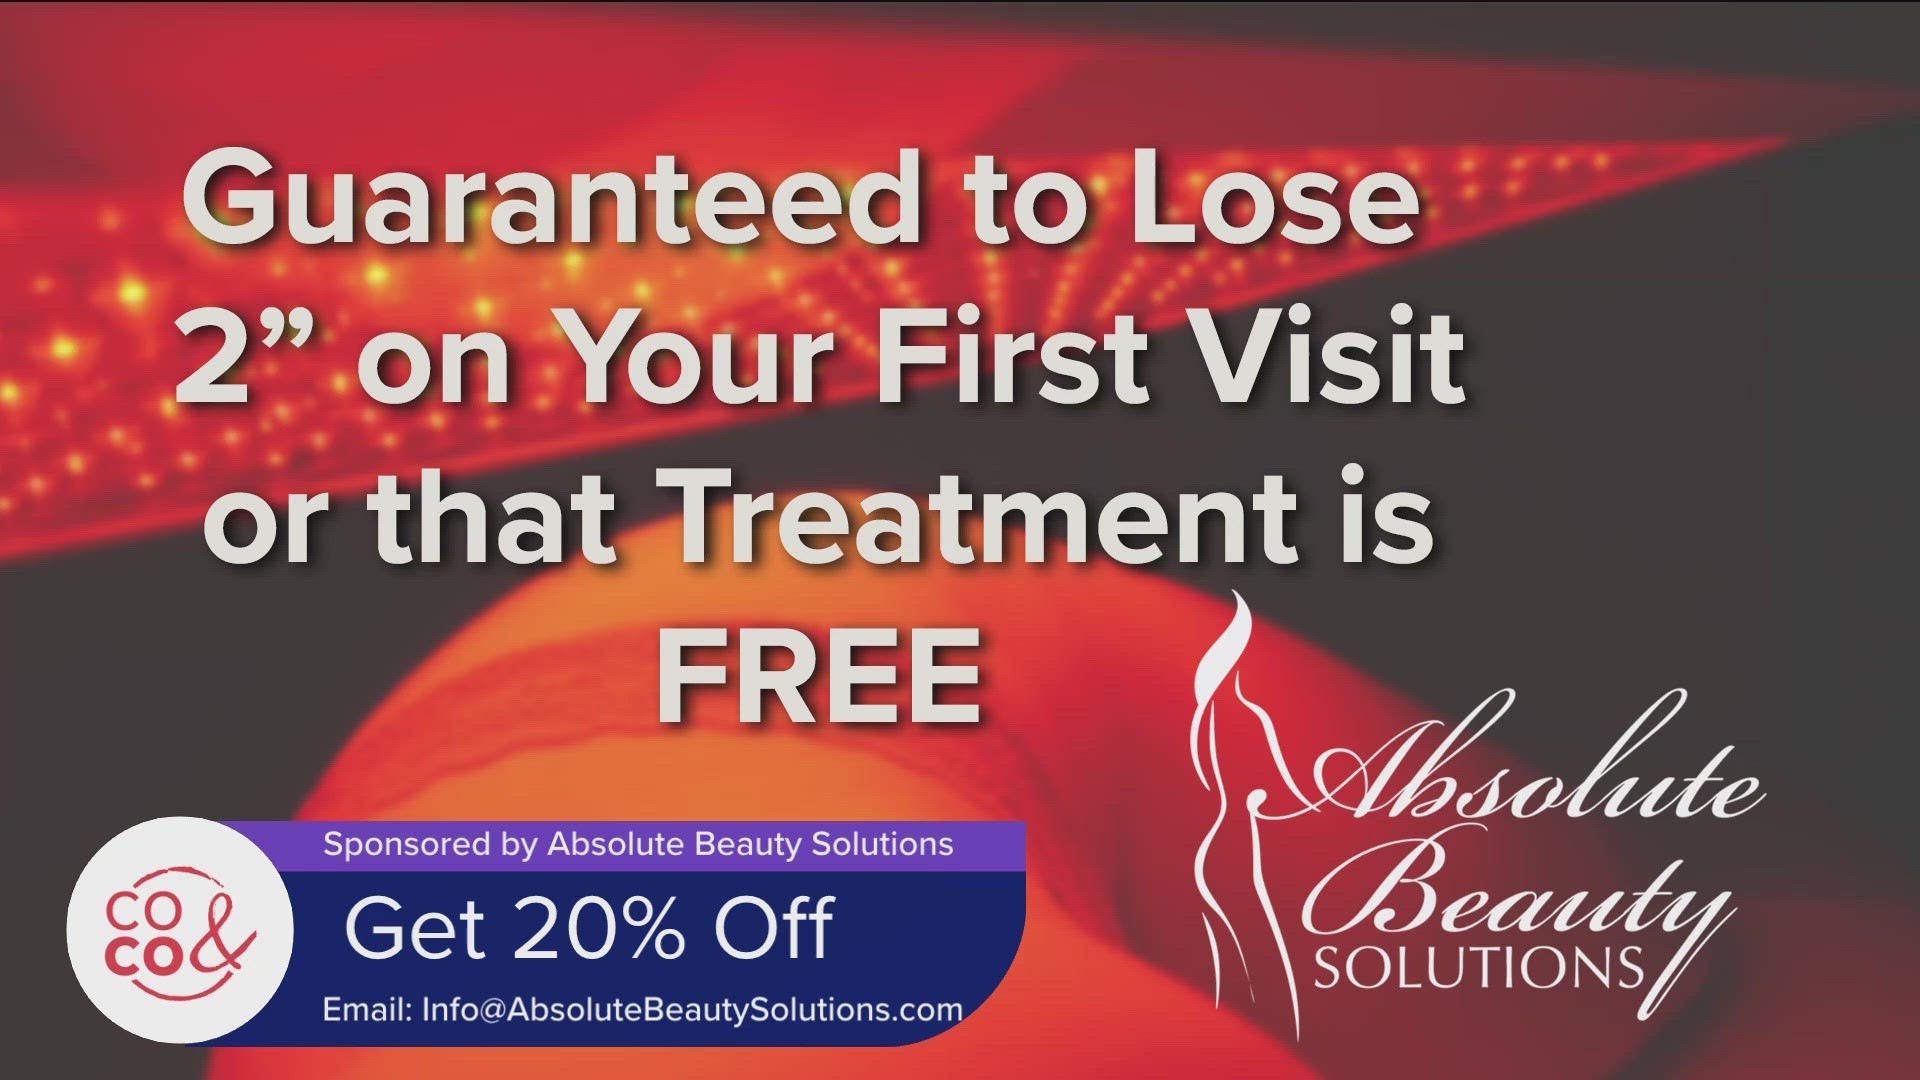 Call 303.420.5558 for 20% off an Ultra Slim package. Learn more at AbsoluteBeautySolutions.com. **PAID CONTENT**